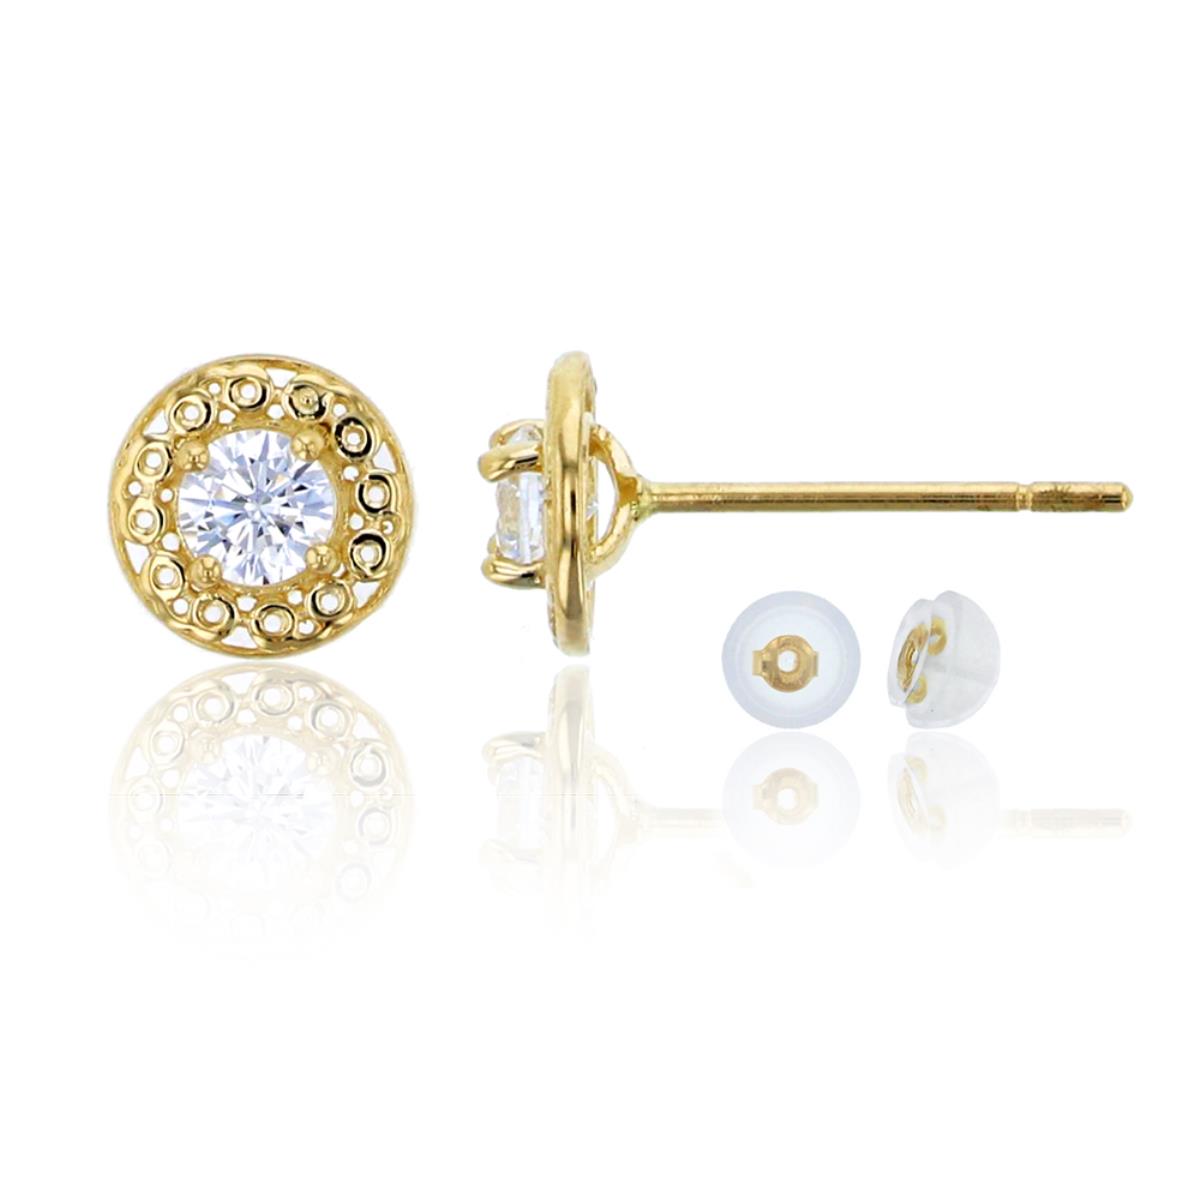 10K Yellow Gold 3mm Round Cut CZ Filigree Stud Earring & 10K Silicone Back